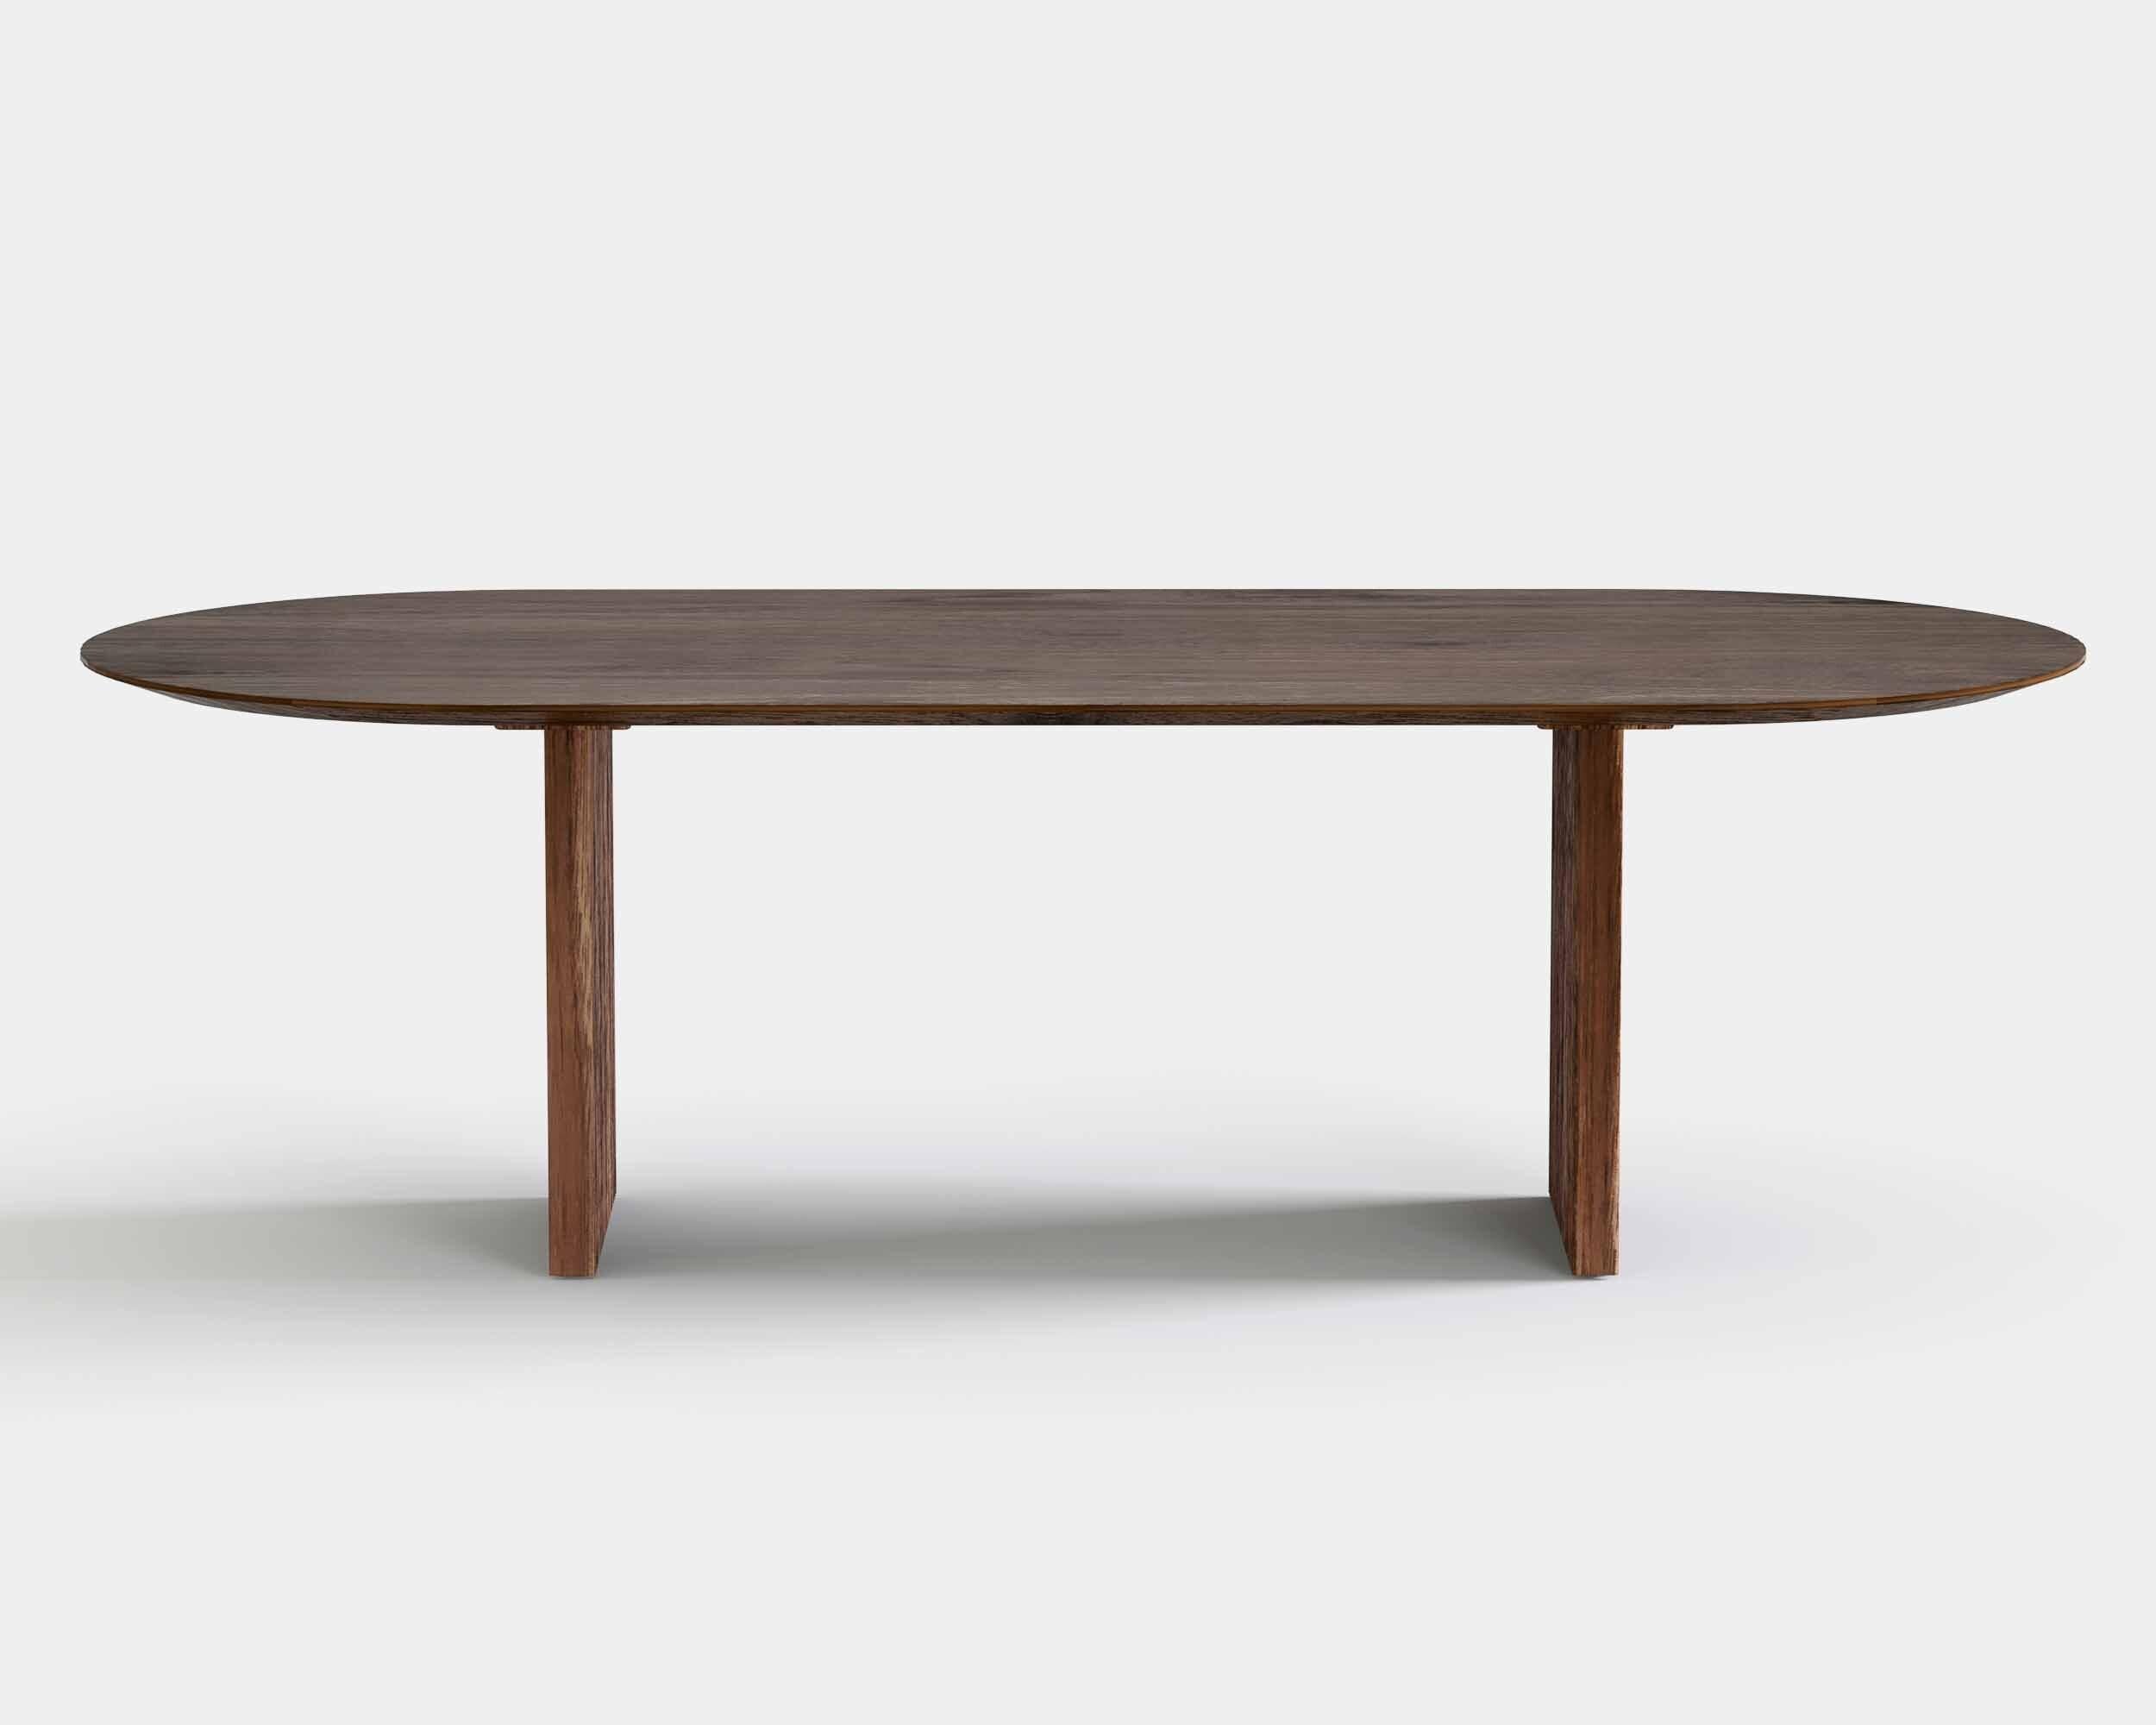 Ten dining table, oval, 370 cm.
Solid wood table top and legs. Handmade in Denmark. 

Measures: height: 72 or 74 cm

Table top dimensions:
– 200 x 95 cm
– 240 x 105 cm
– 270 x 105 cm
– 300 x 105 cm
– 340 x 105 cm
– 370 x 105 cm
– 400 x